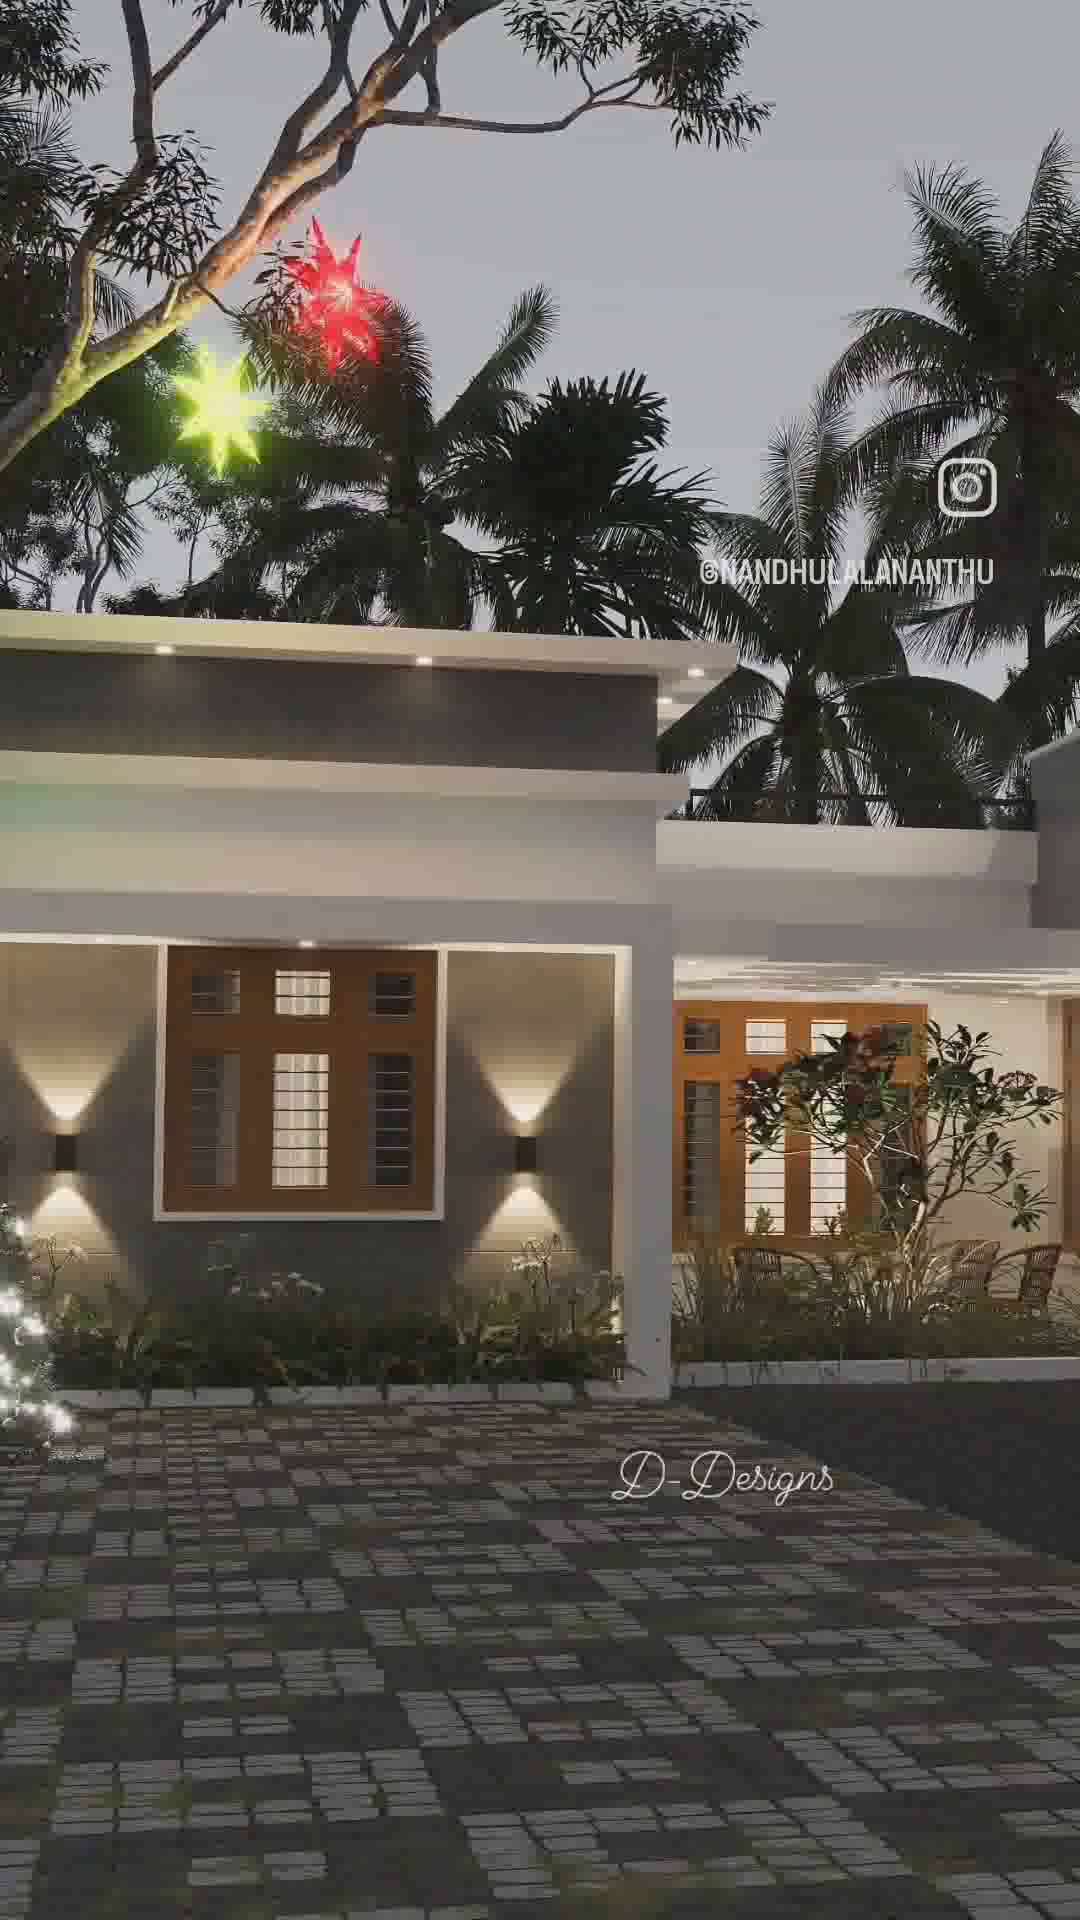 Exterior Designing |Interior Designing
Completed Designed Project
Budget friendly Homes
Enquiry for Design
contact :-9946999153, 9847482255
nandhulal11@gmail.com
 #KeralaStyleHouse  #keraladesigns  #keralaplanners #keralahomeplans 
 #KeralaStyleHouse  #keralahomeplans  #keralahomeinterior  #kerala_architecture  #keralahomestyle